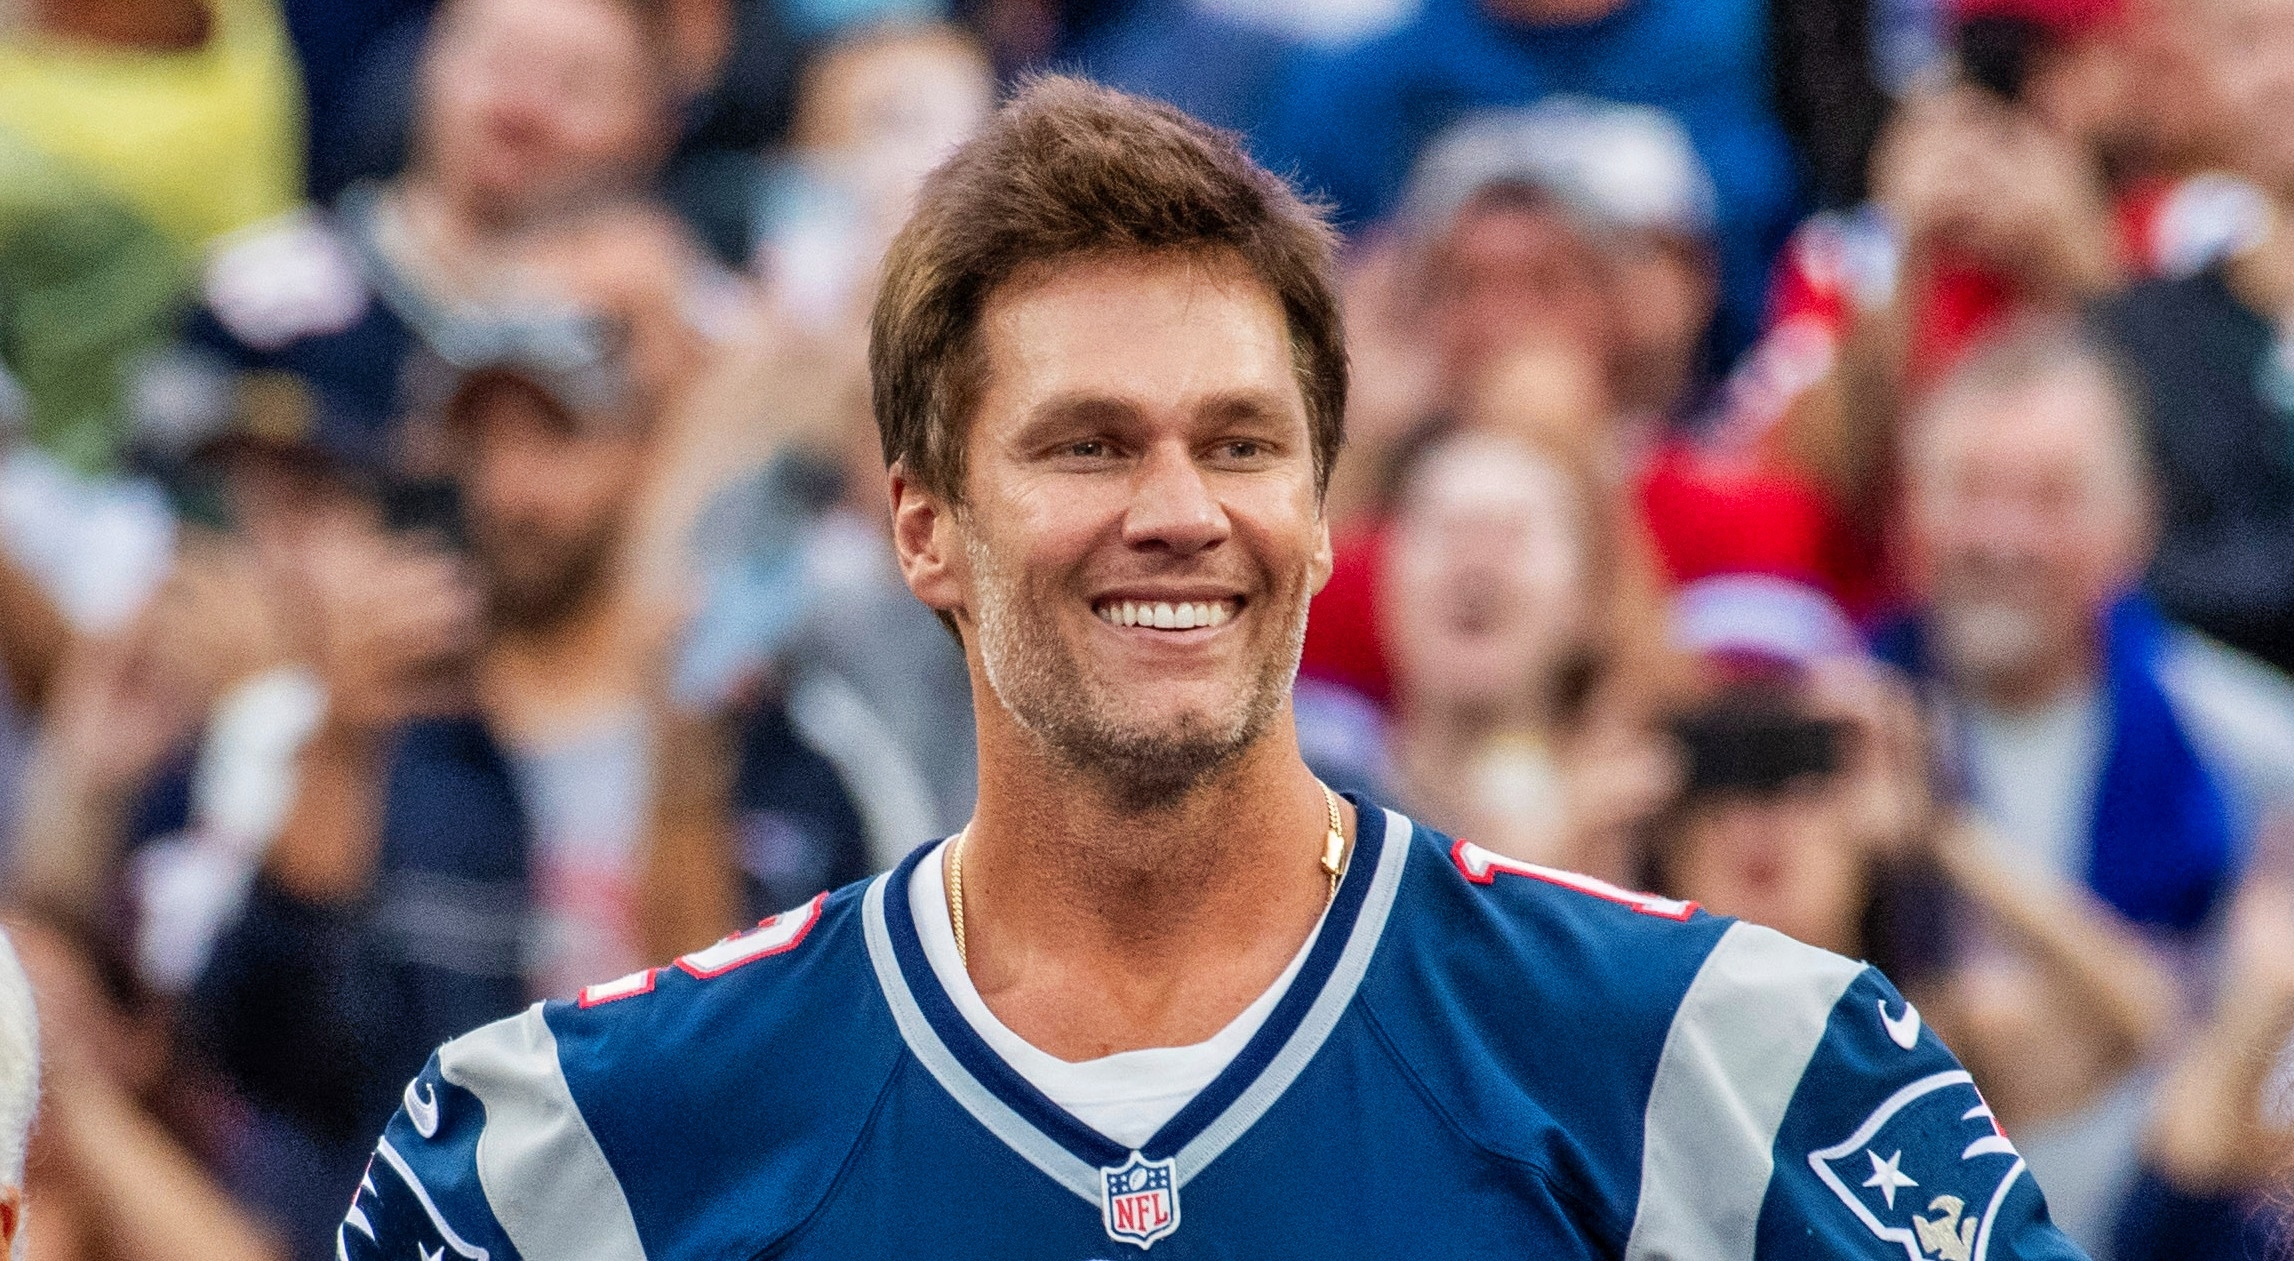 There are already fans, pundits begging for Tom Brady to join the